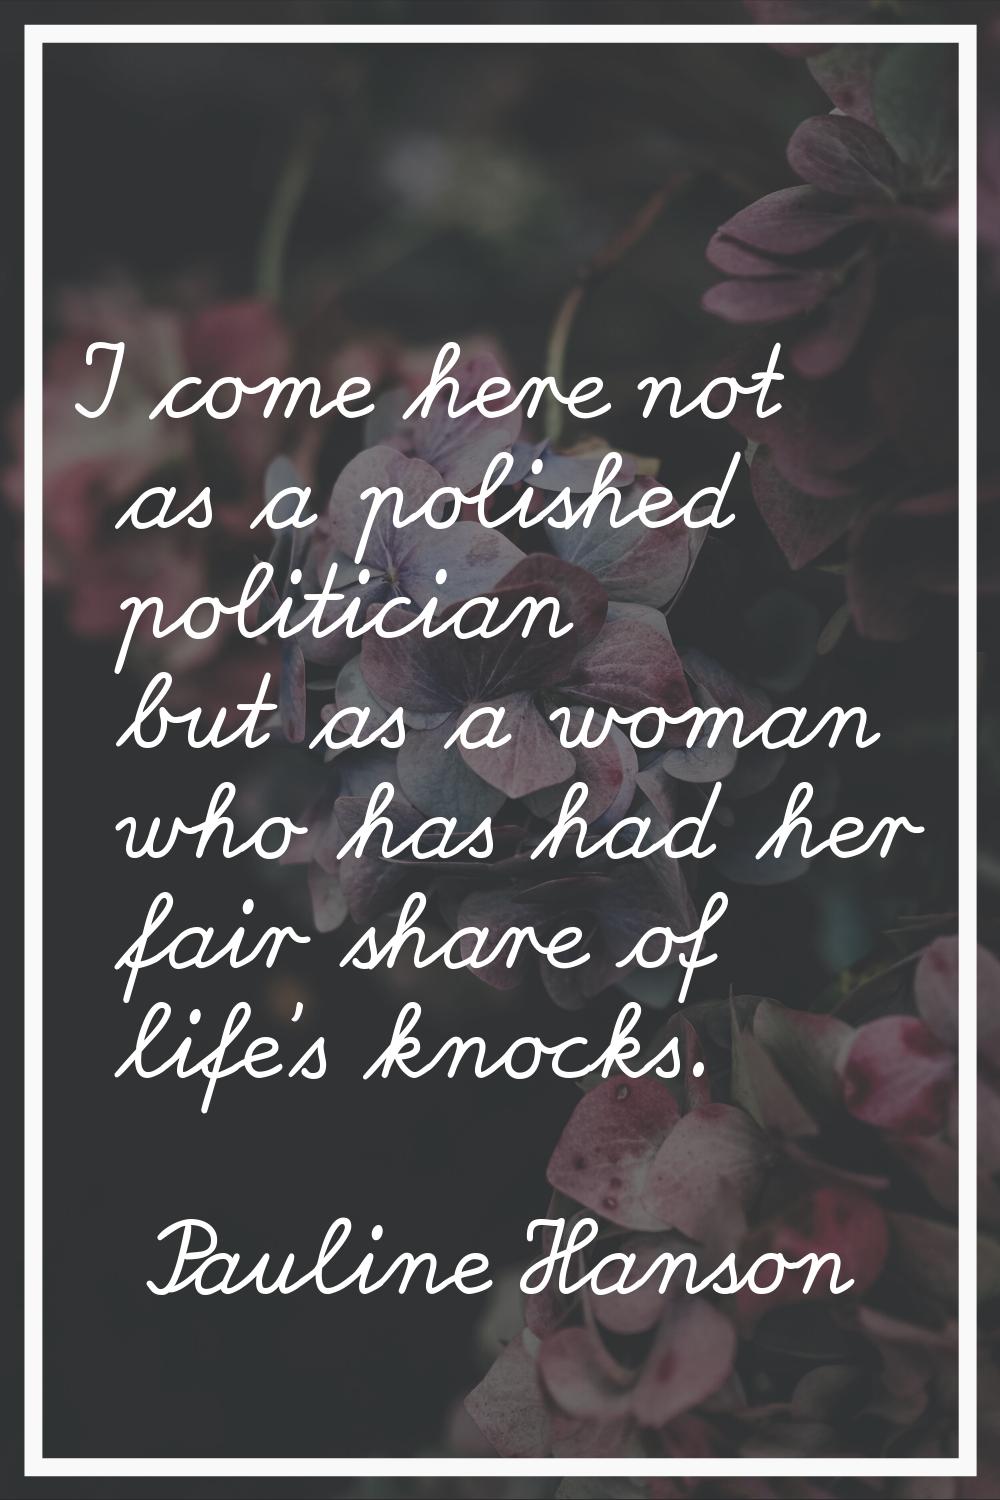 I come here not as a polished politician but as a woman who has had her fair share of life's knocks